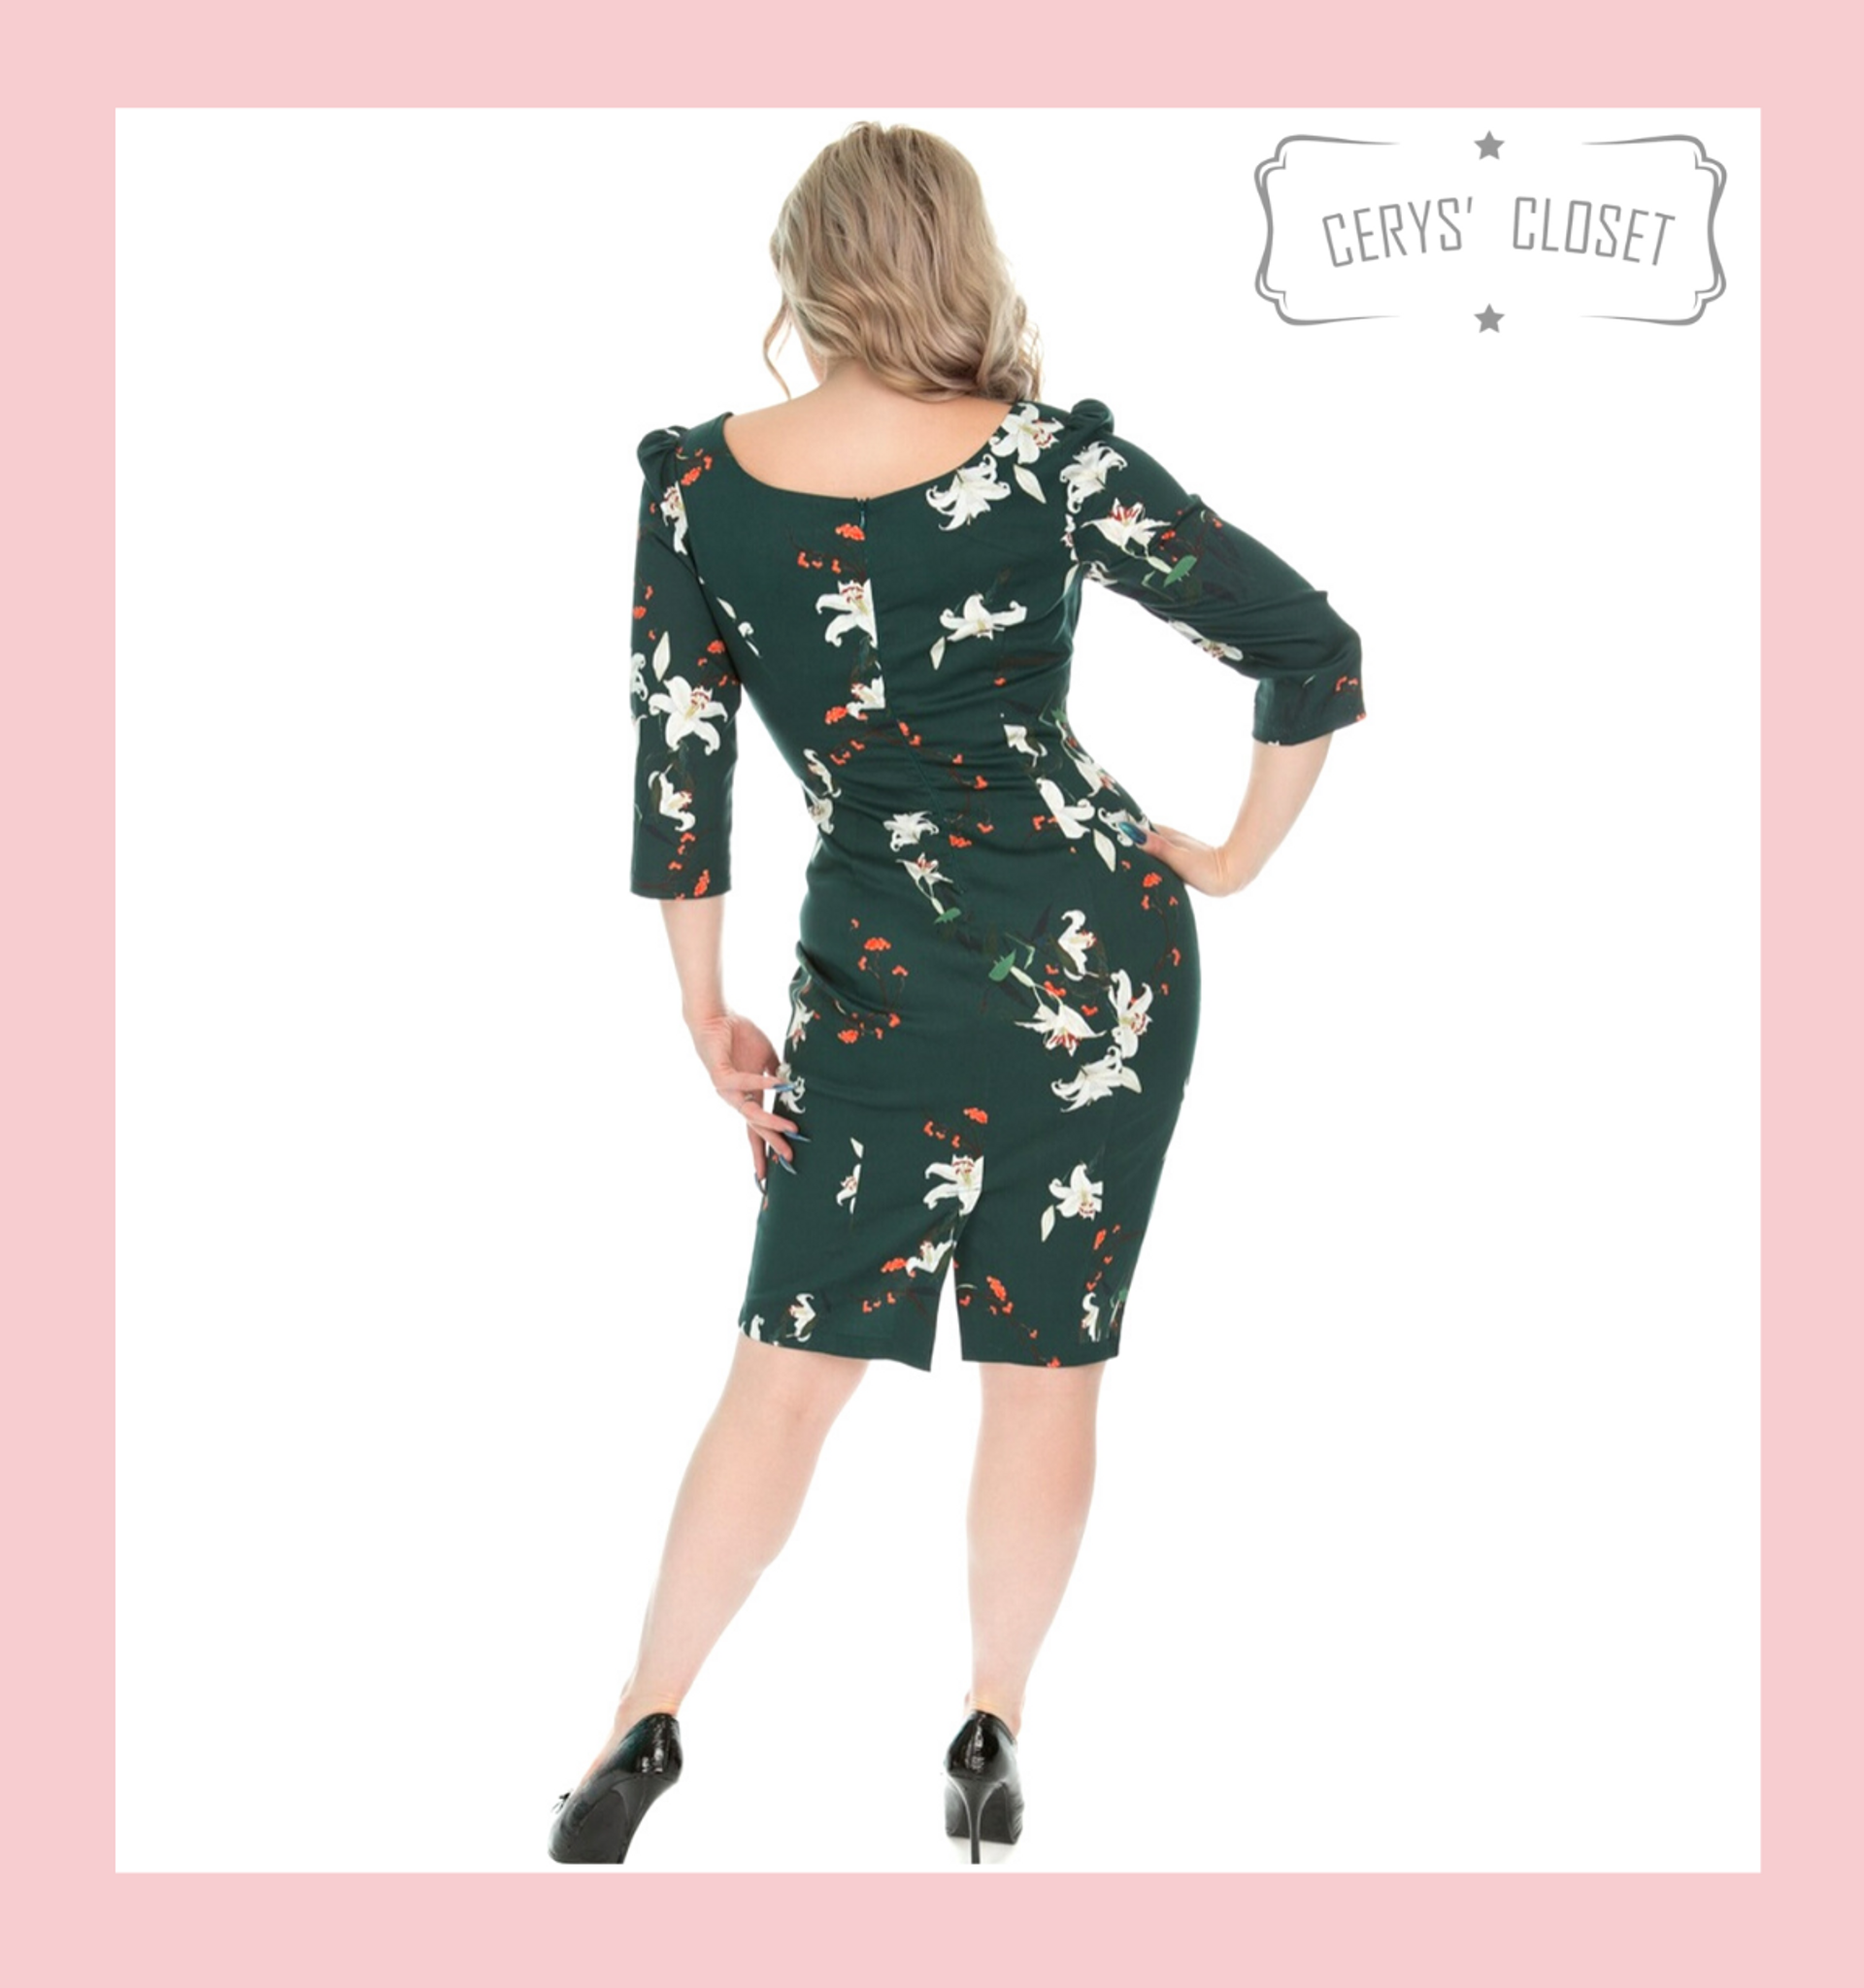 Green Lyddie Wiggle Dress - a Vintage style pencil dress